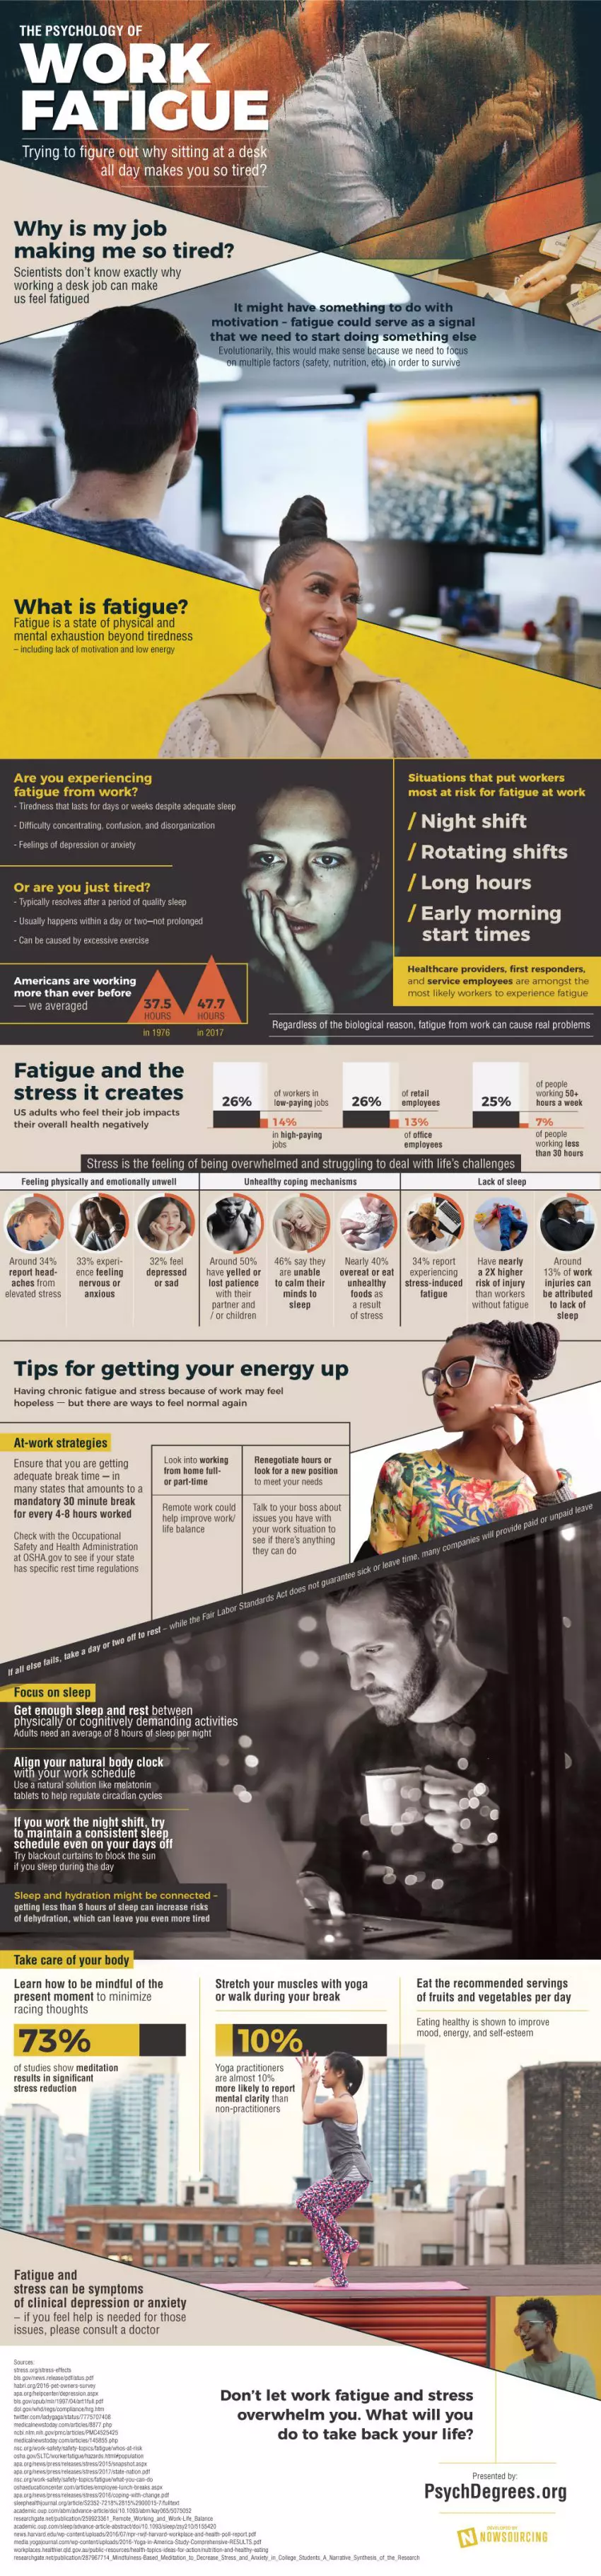 Work fatigue can leave you drained. See what causes it